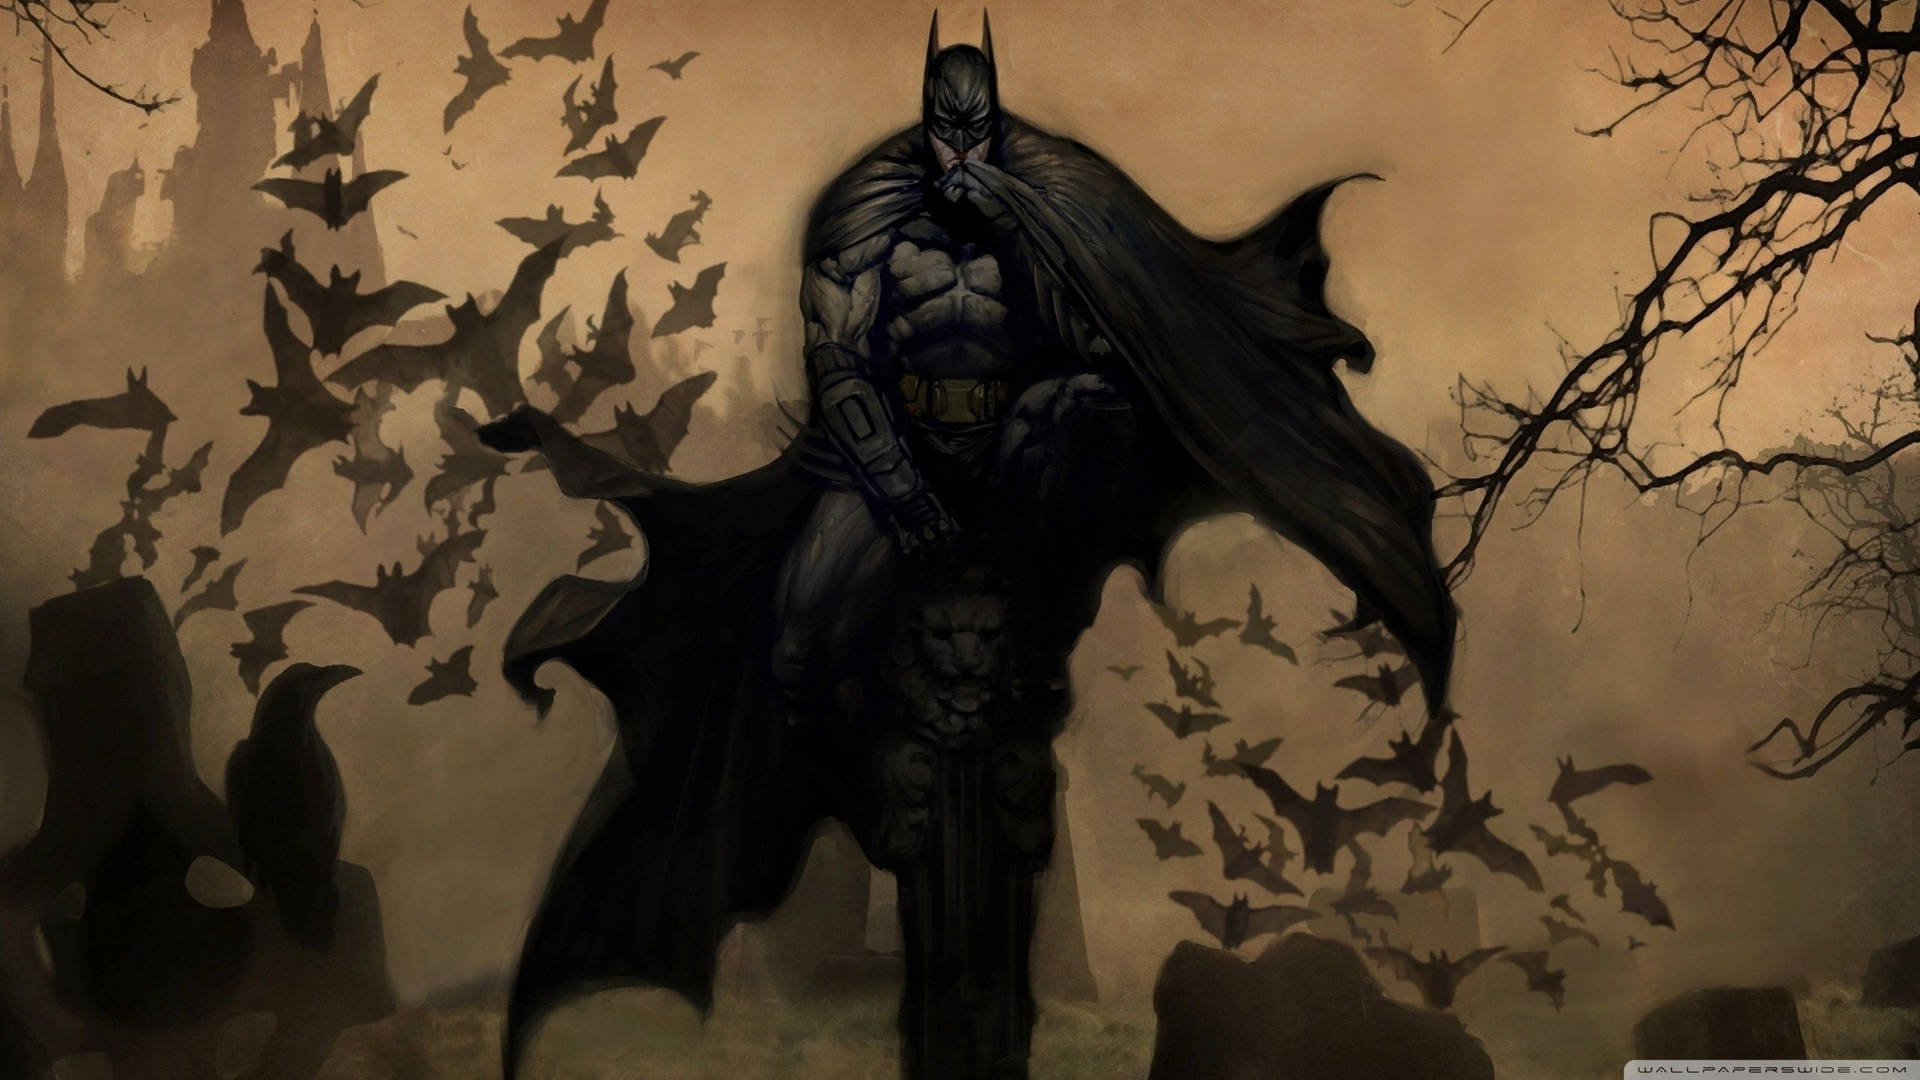 Creepy Batman In Forest Background